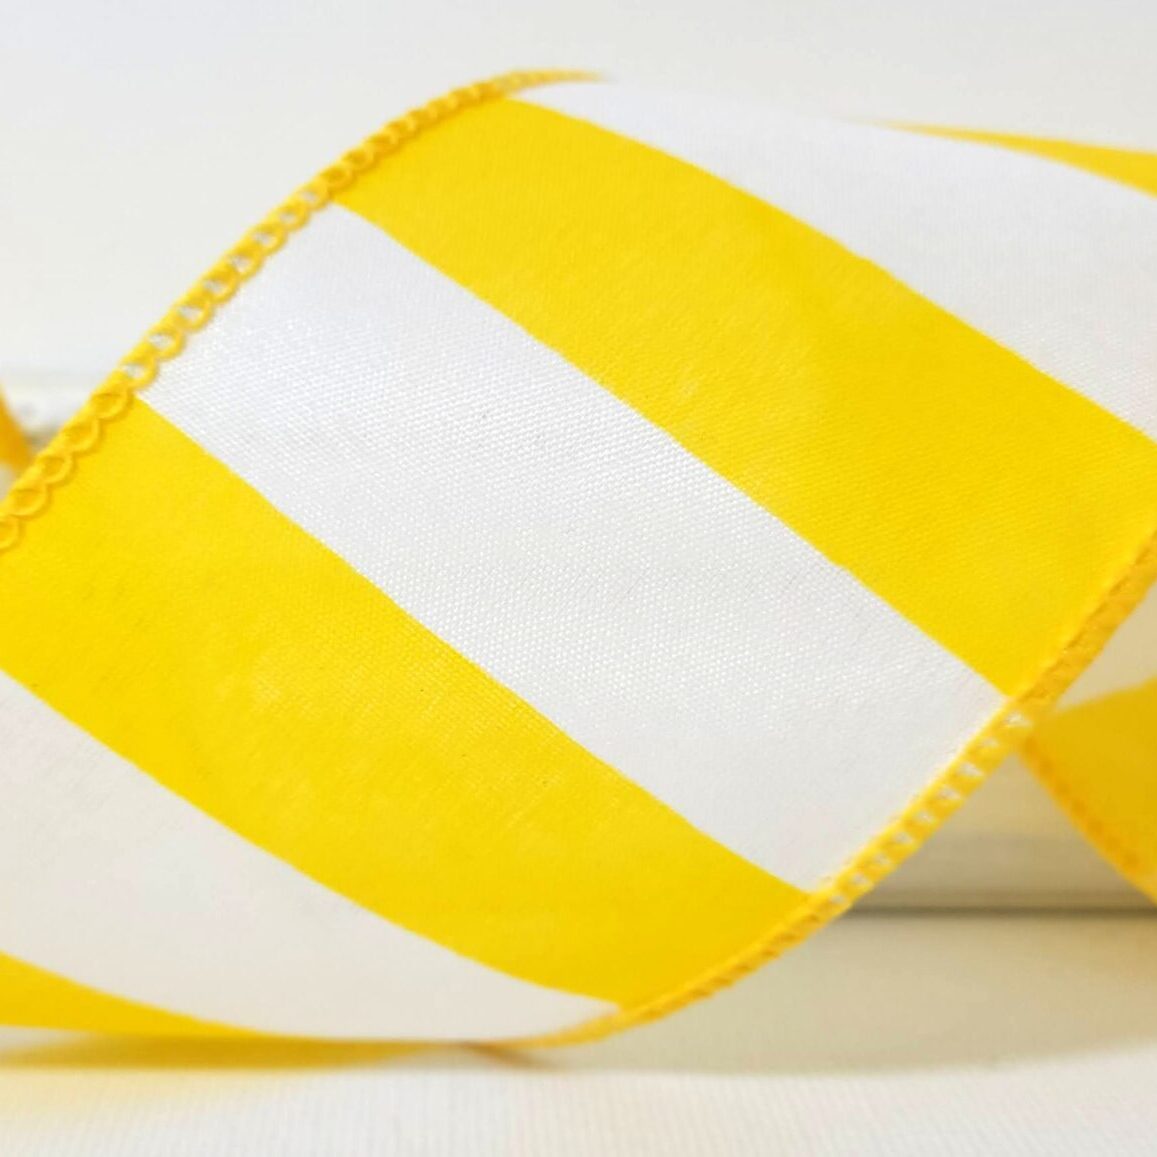 A close up of the yellow and white ribbon